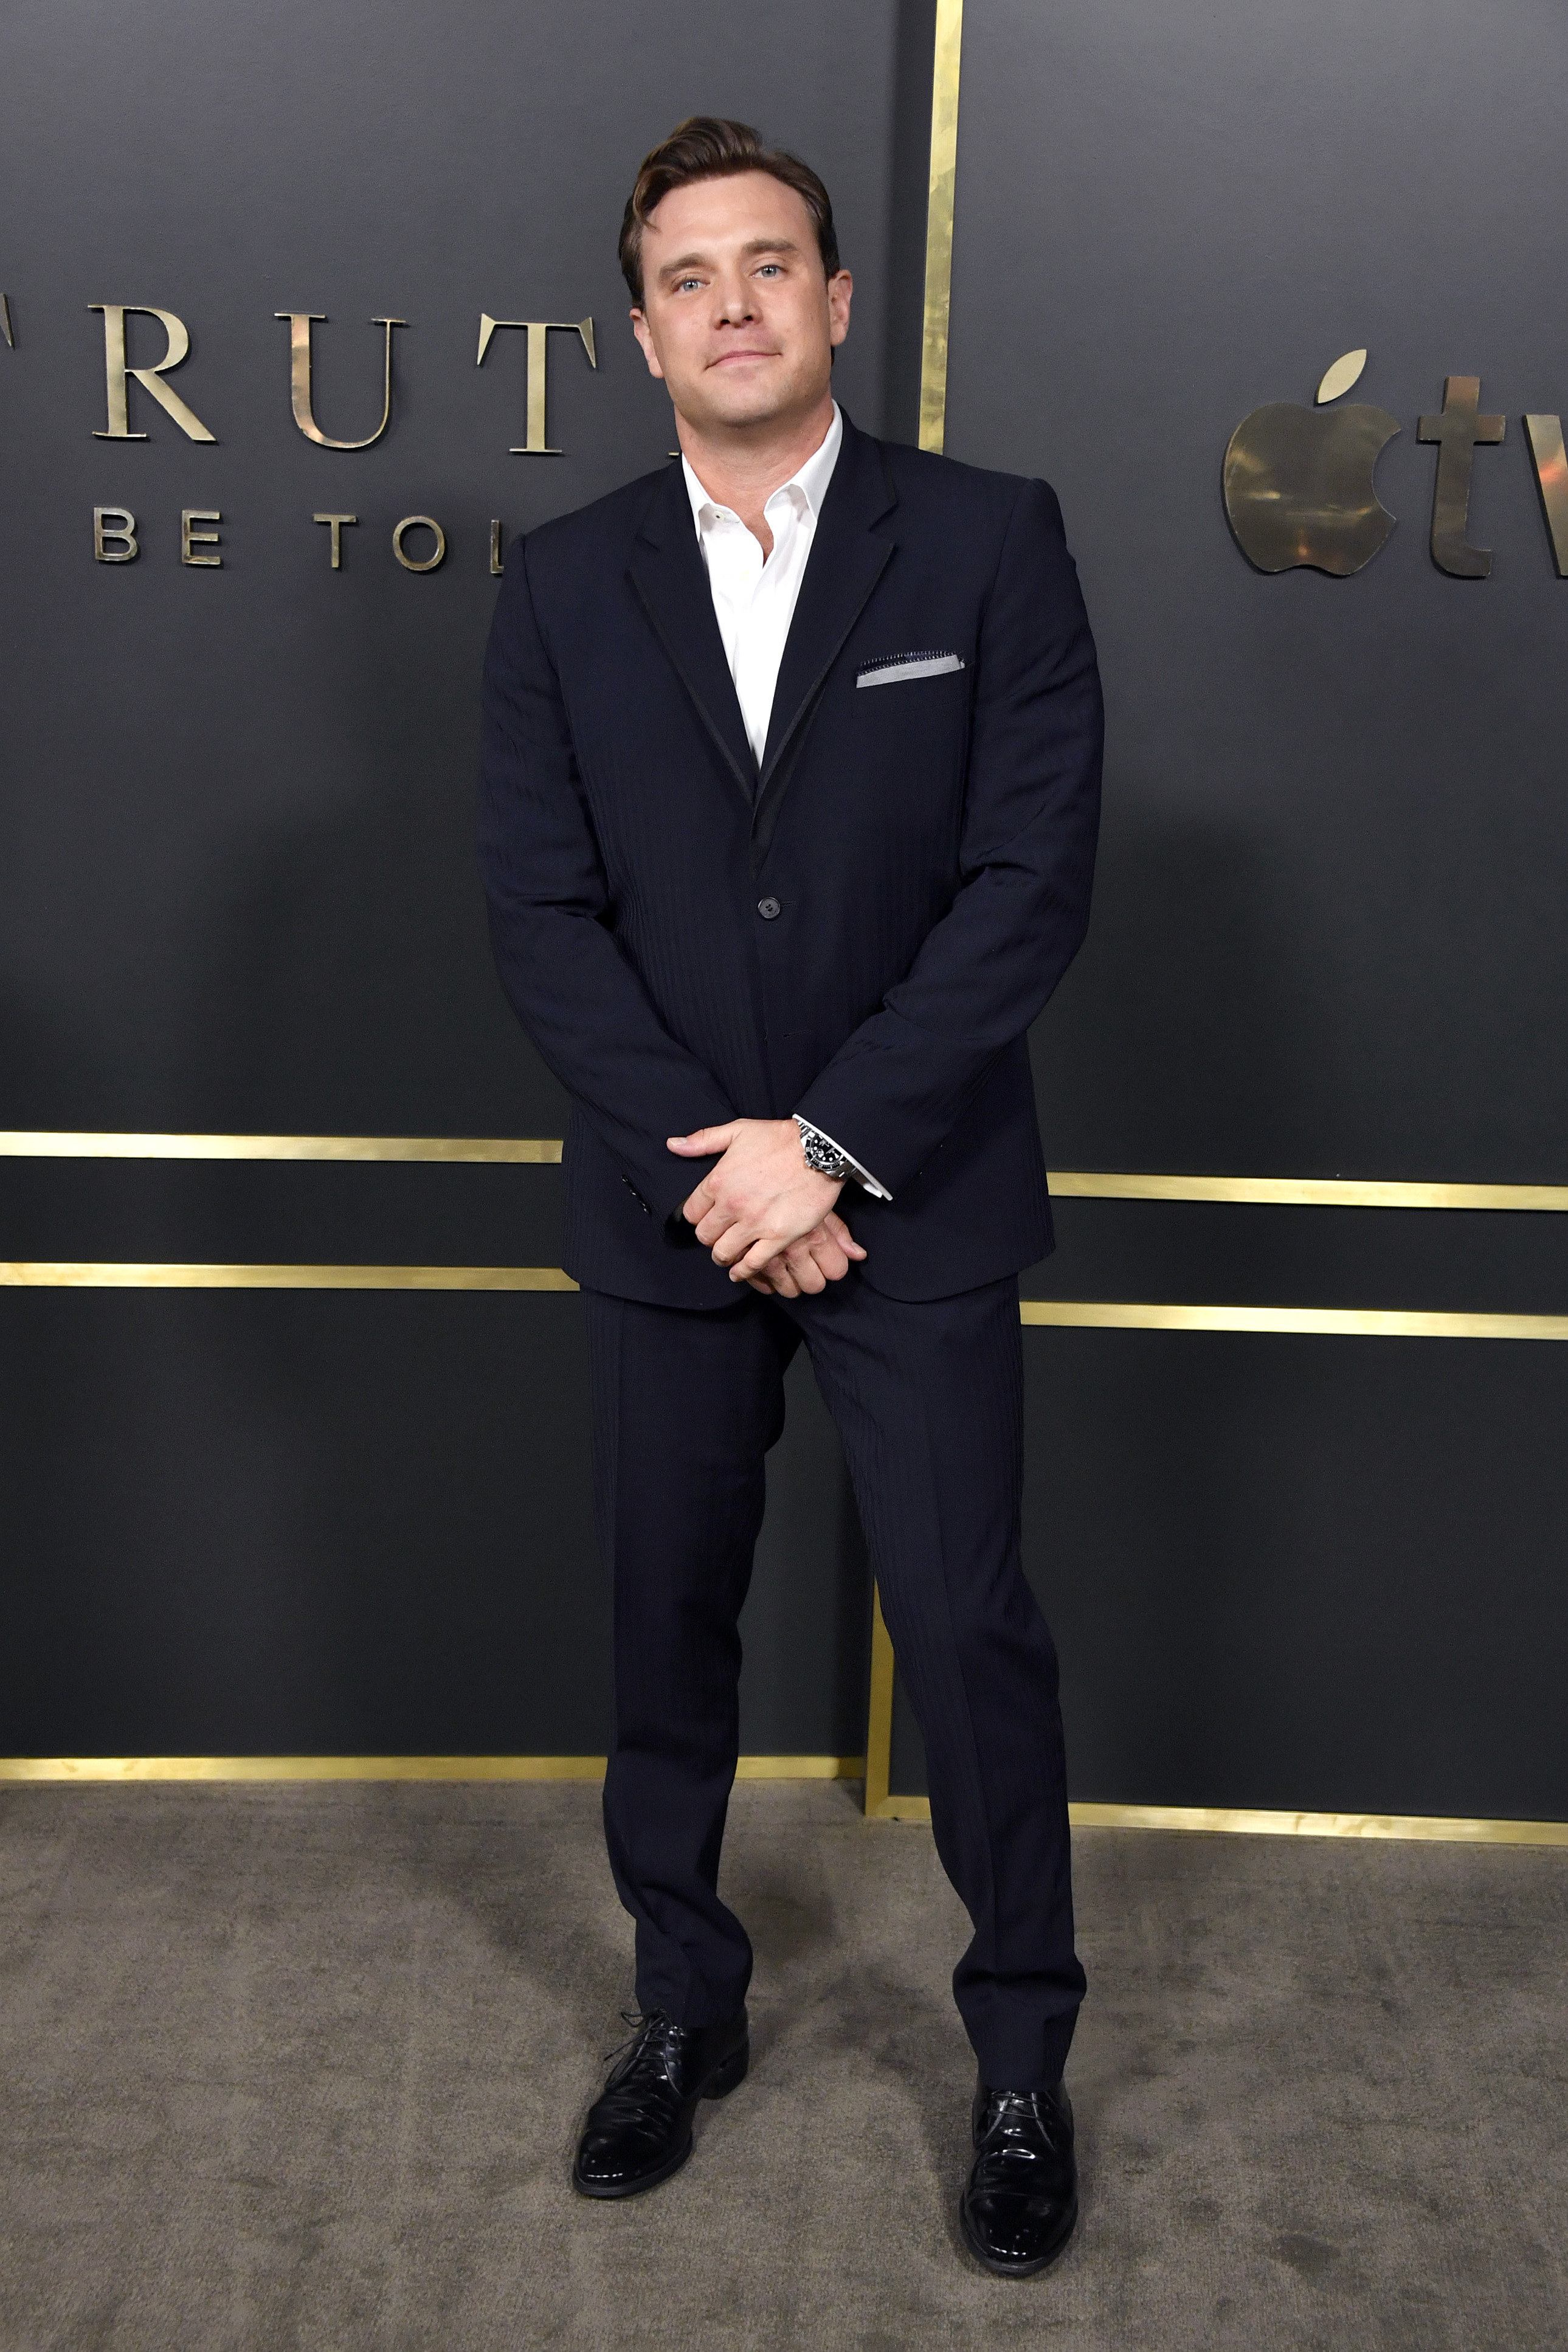 Billy Miller at the premiere for "Truth Be Told" in Beverly Hills, 2019 | Source: Getty Images